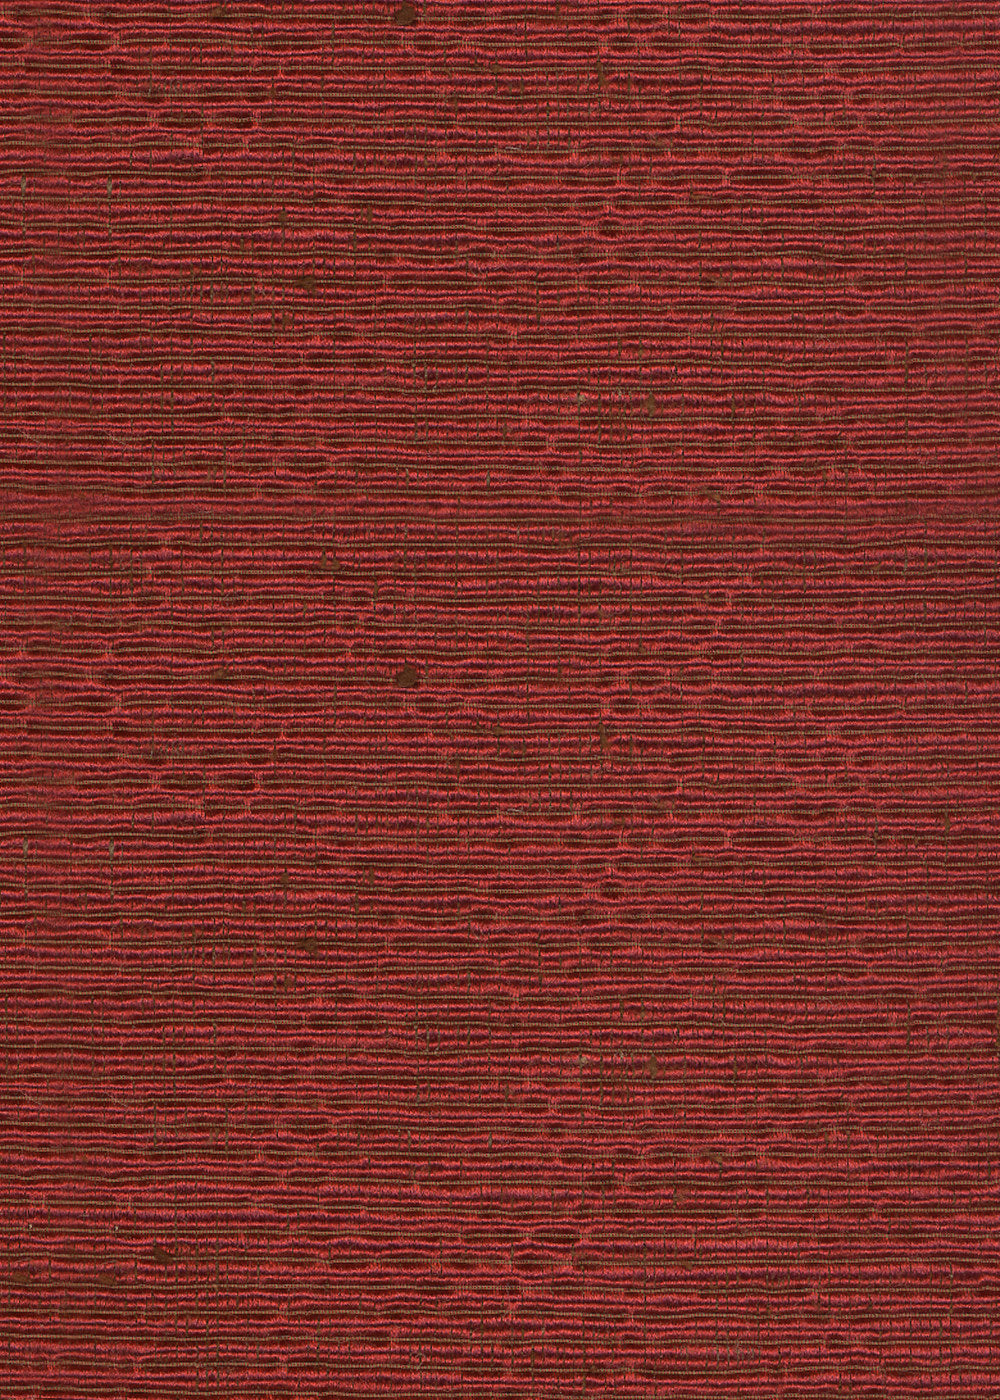 dark red fabric with a horizontal ribbed texture